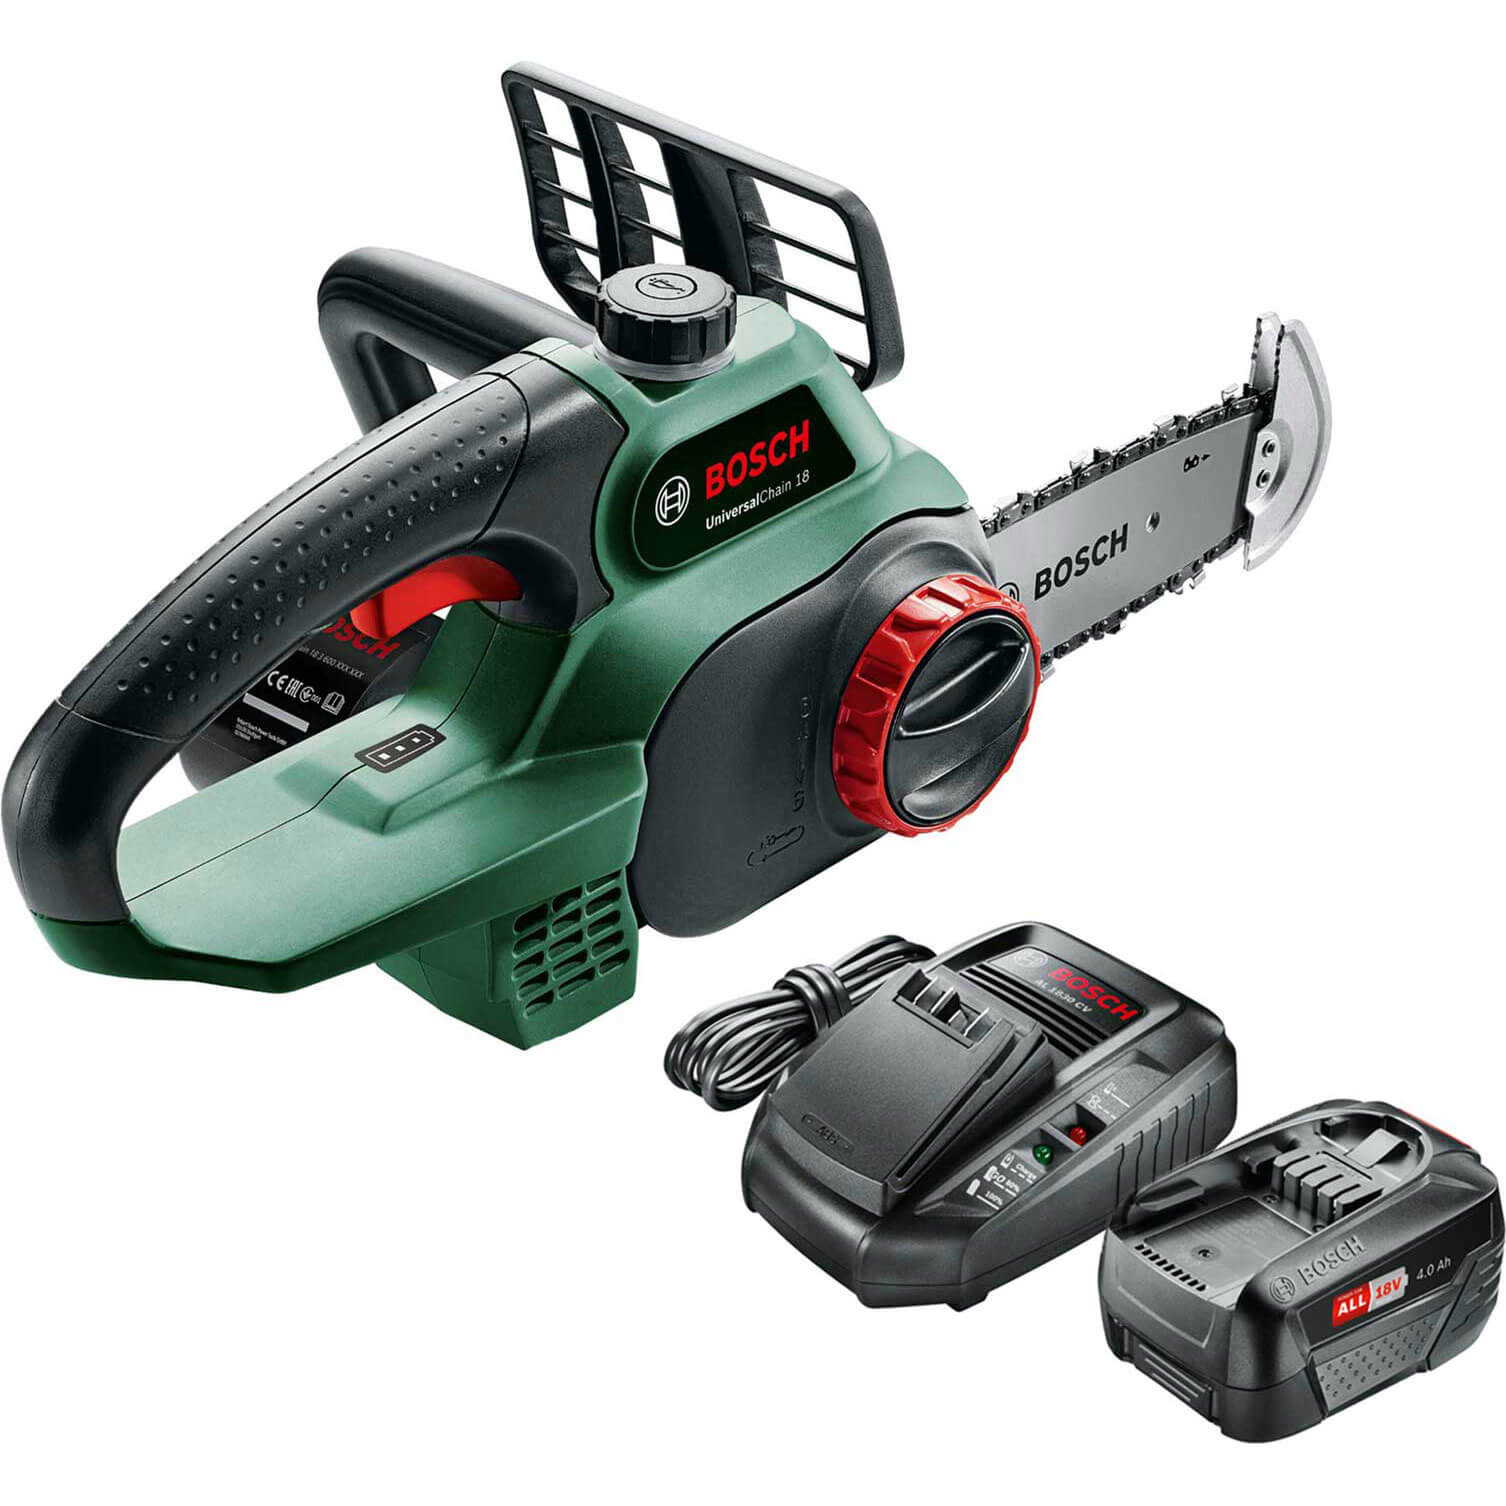 Image of Bosch UNIVERSALCHAIN 18v Cordless Chainsaw 200mm 1 x 4ah Li-ion Charger